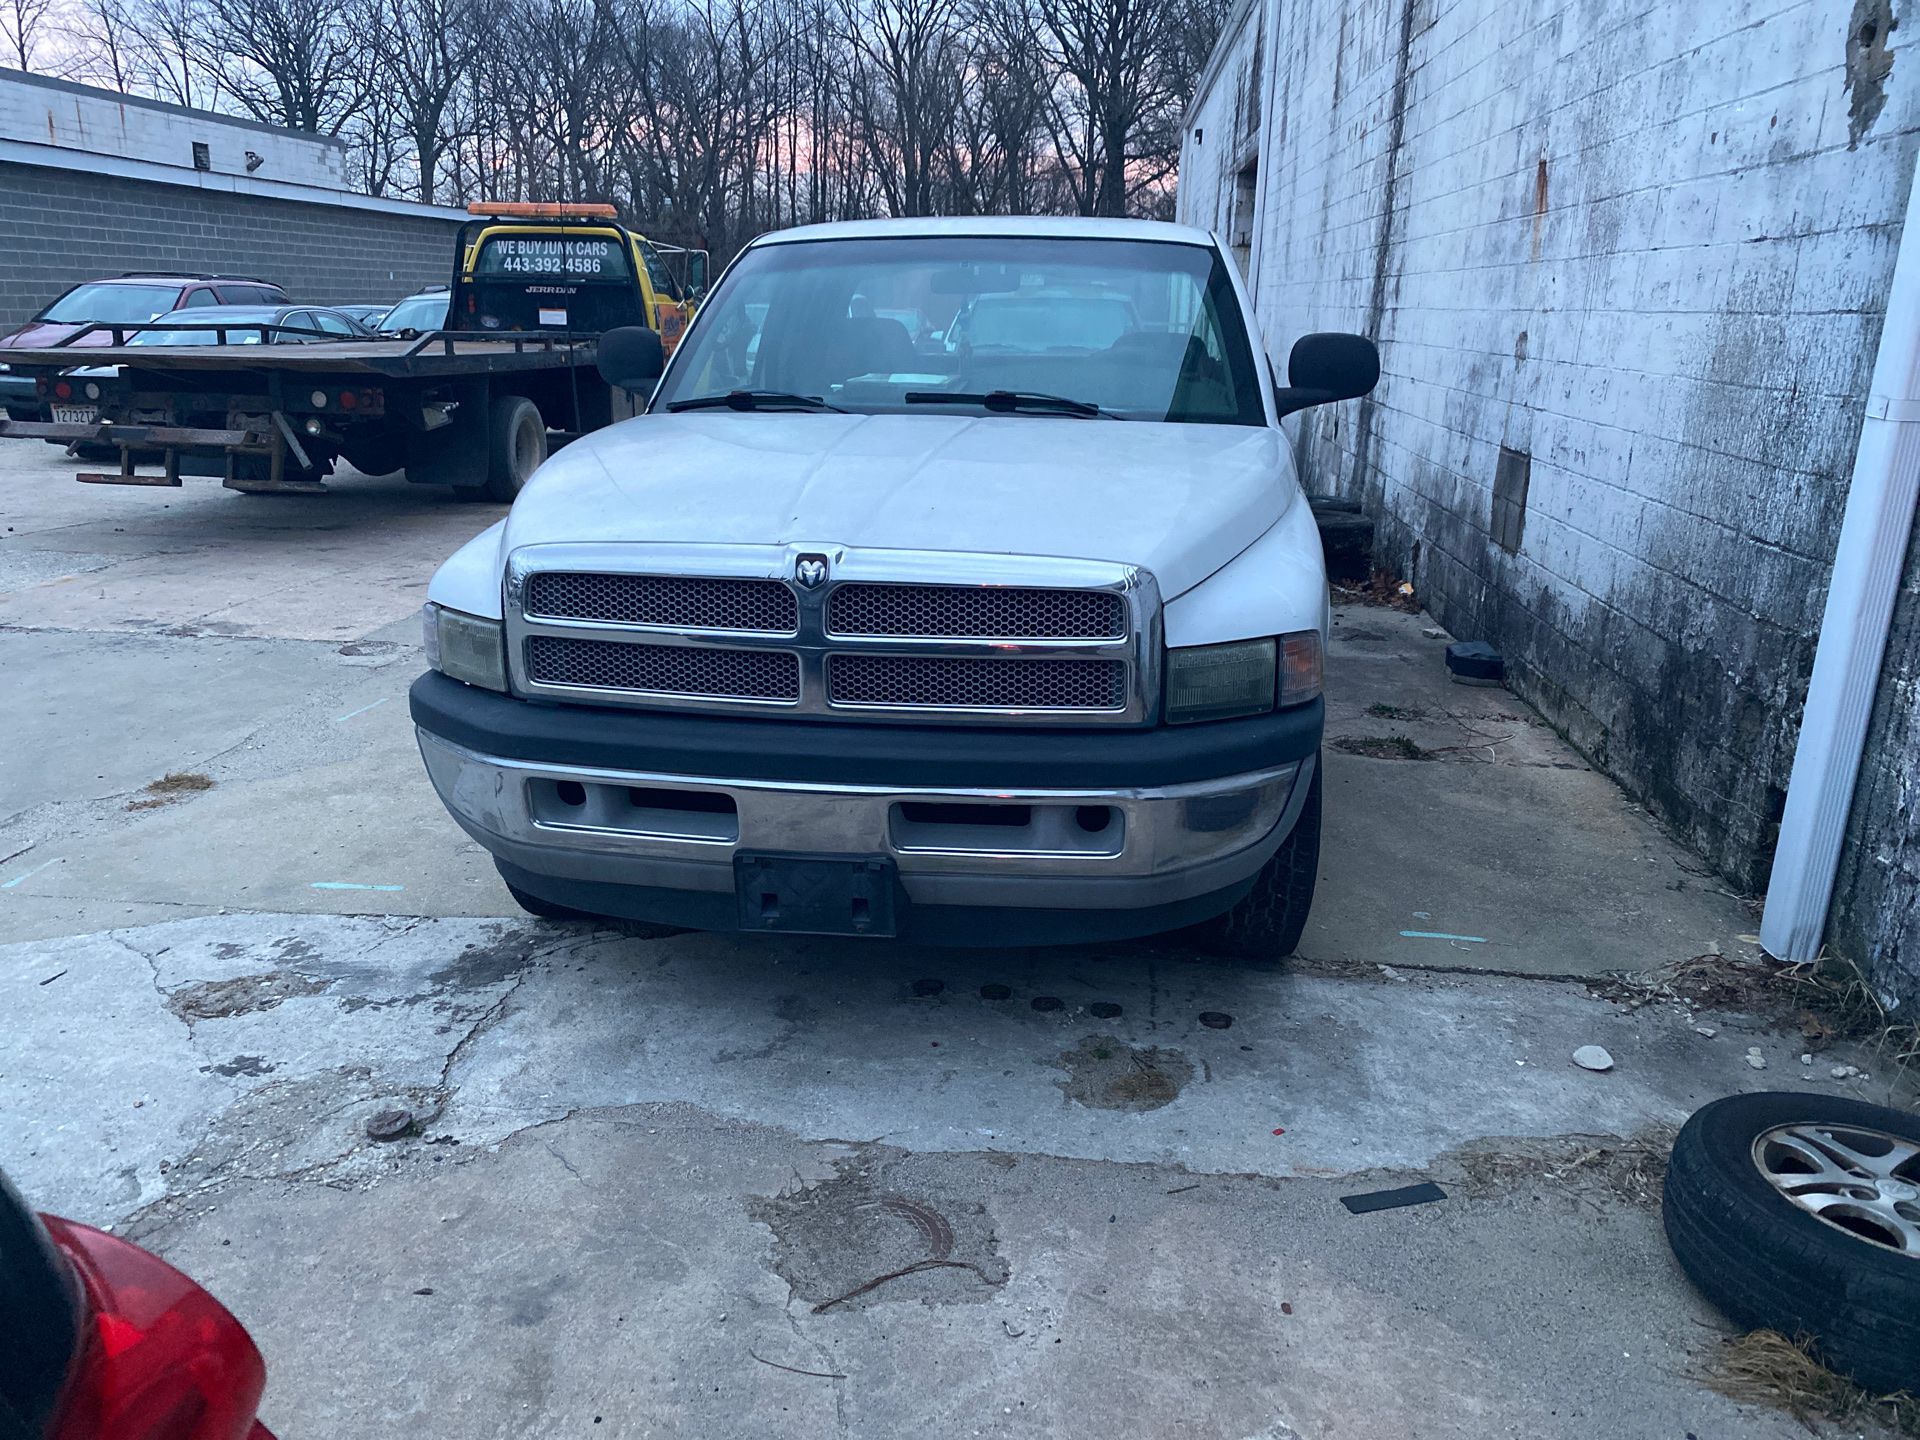 2001 Dodge ram 1500 it’s a truck it runs and drives that should say at all